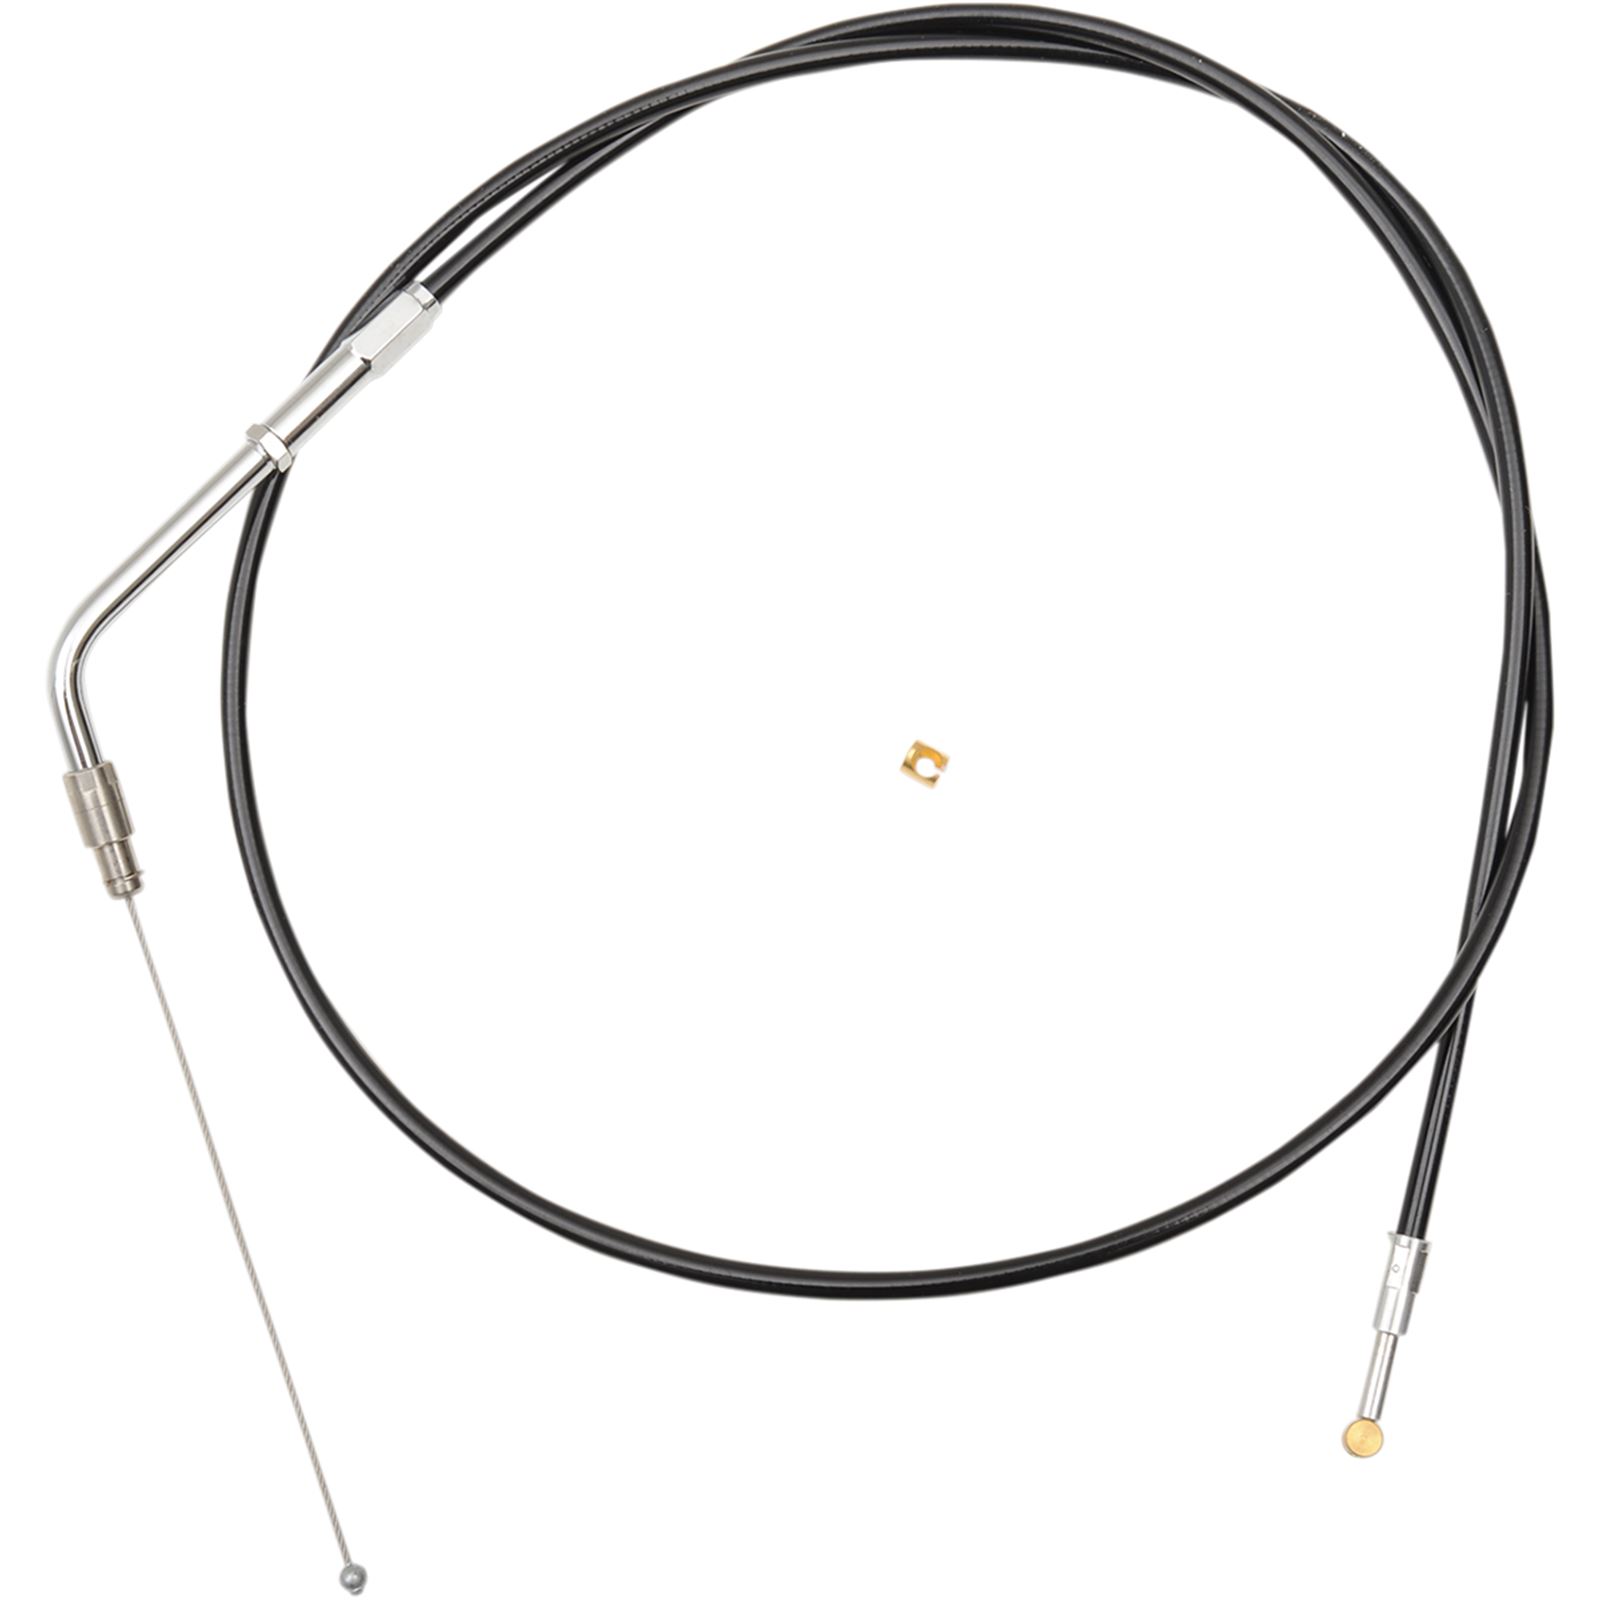 LA Choppers 15" - 17" Black Throttle Cable for '96 - '15 Softail